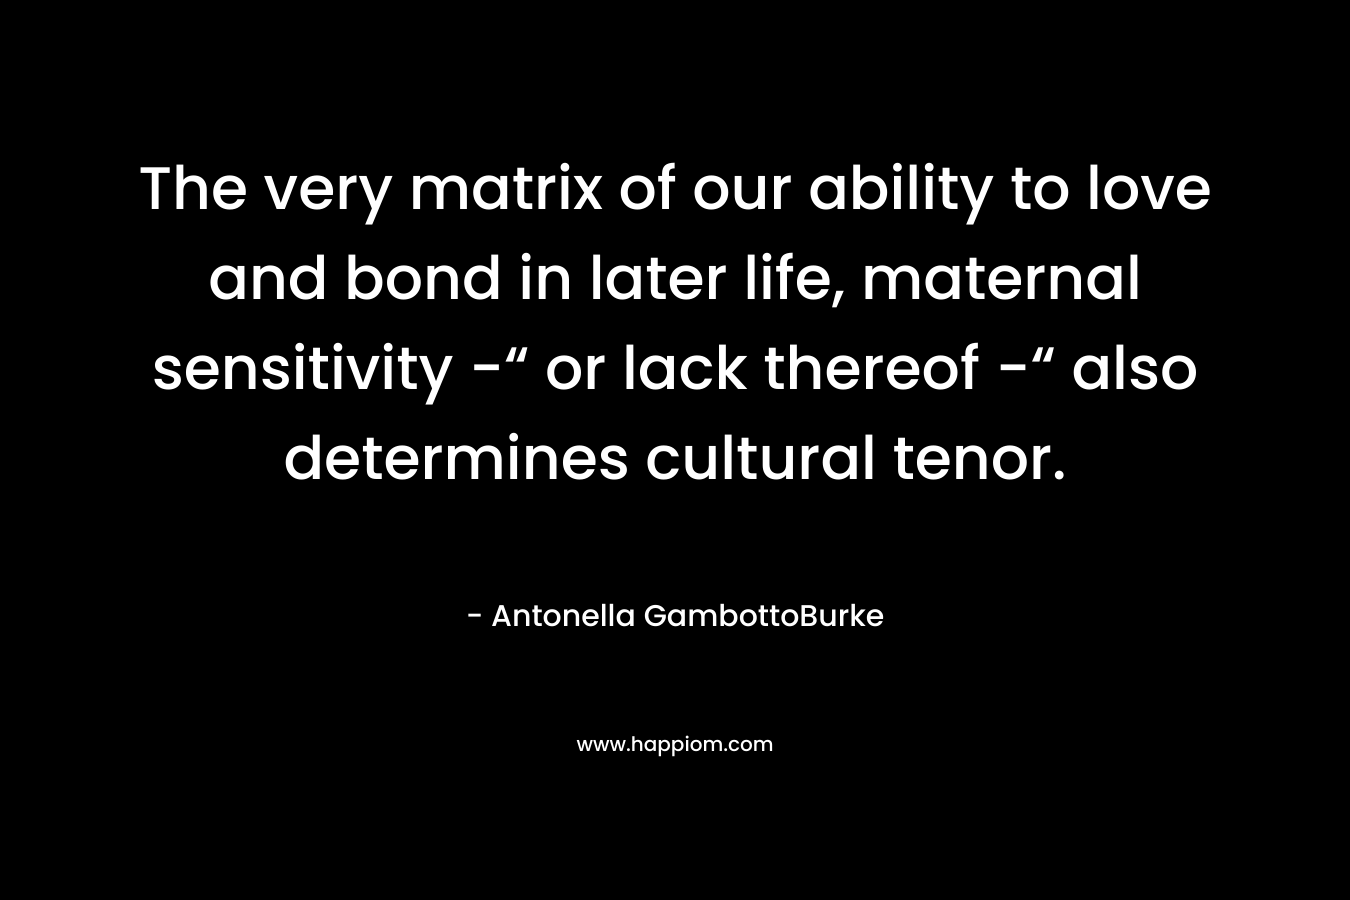 The very matrix of our ability to love and bond in later life, maternal sensitivity -“ or lack thereof -“ also determines cultural tenor.